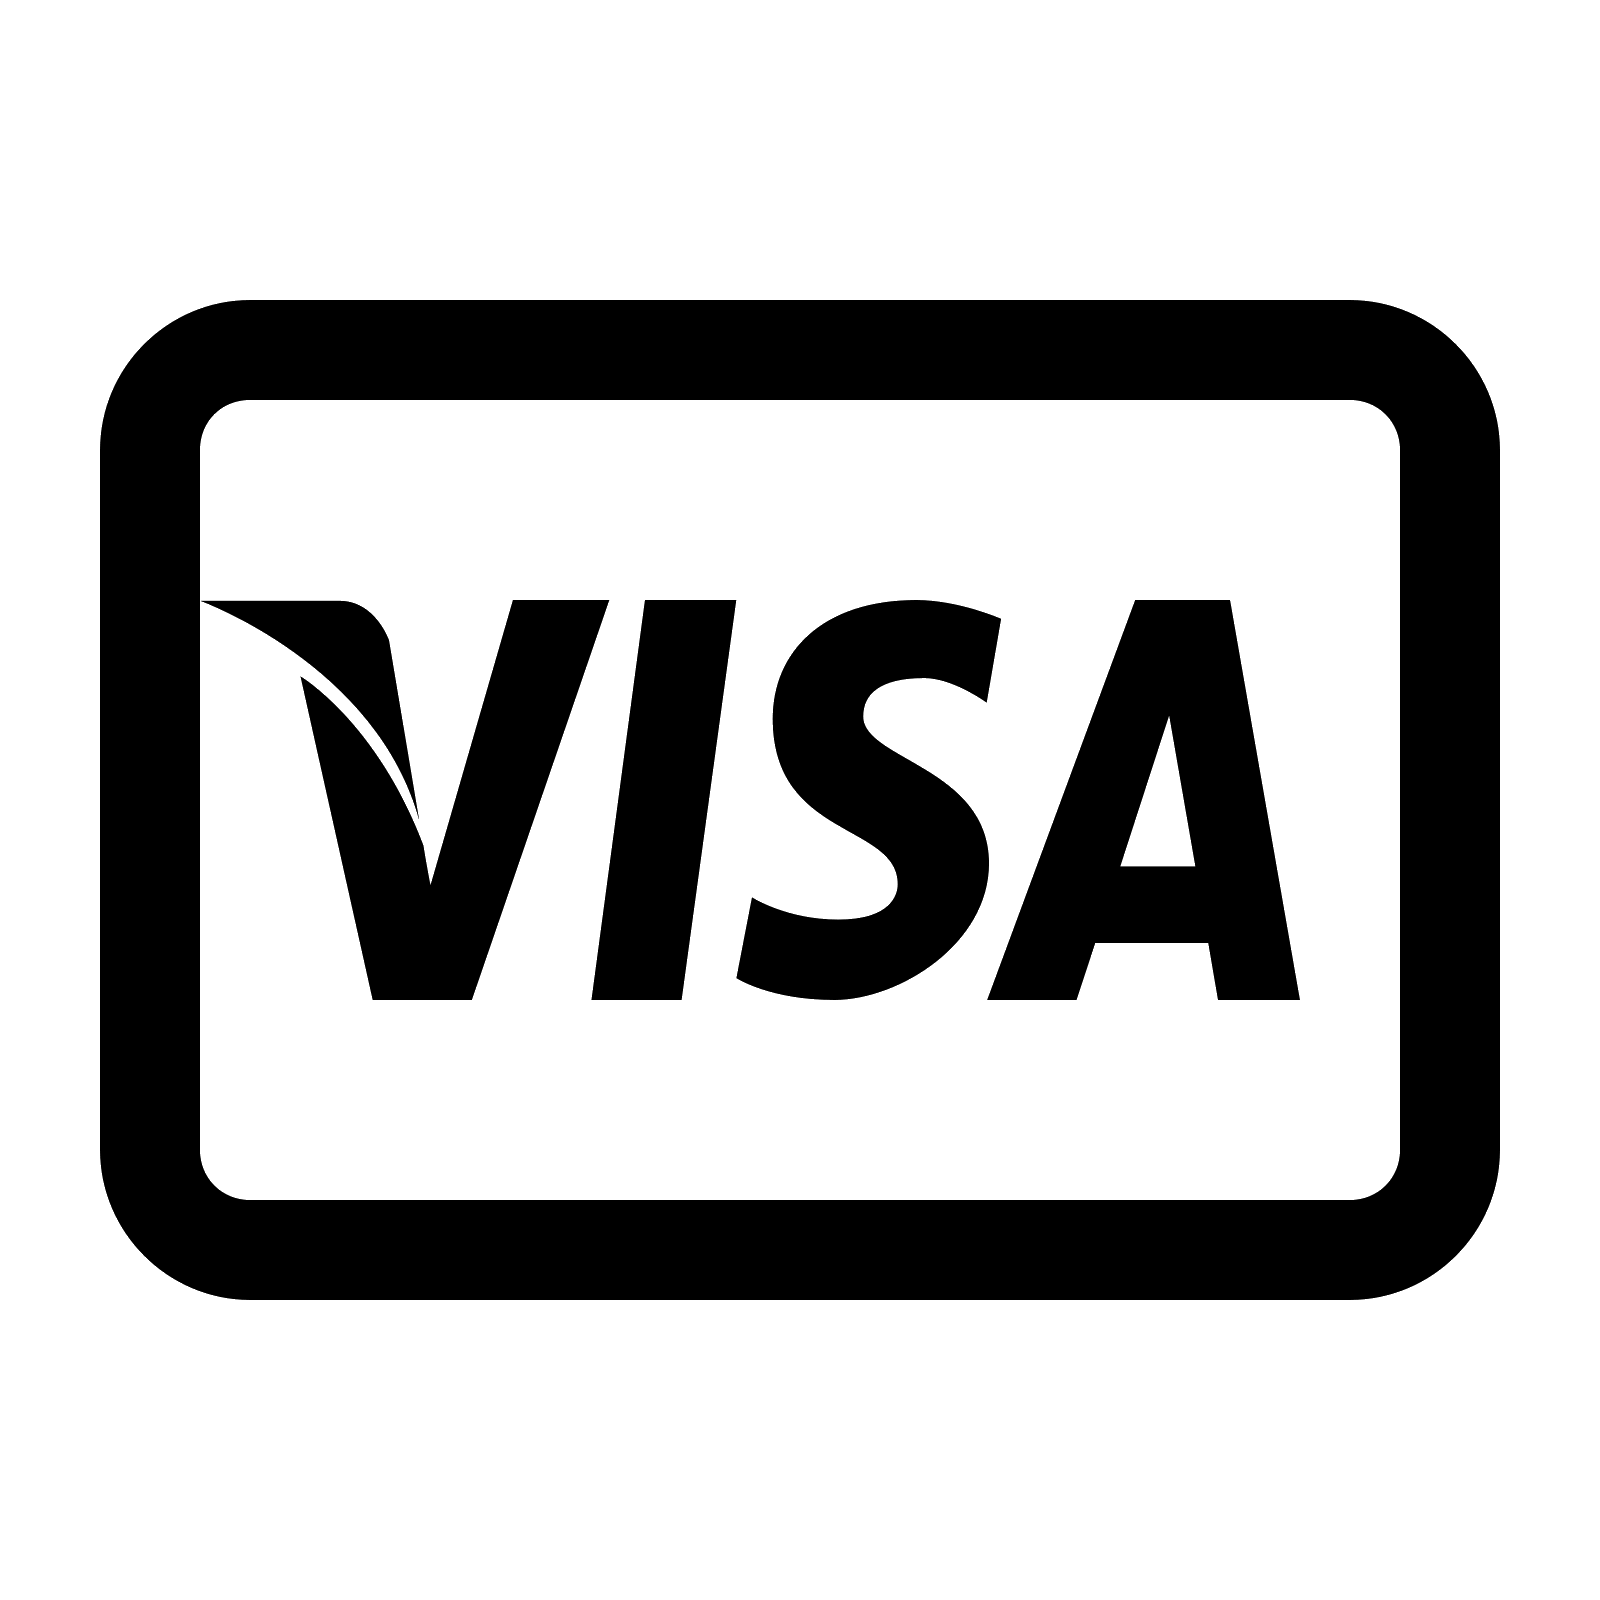 Small Picture of Visa Logo - Visa Icon - free download, PNG and vector